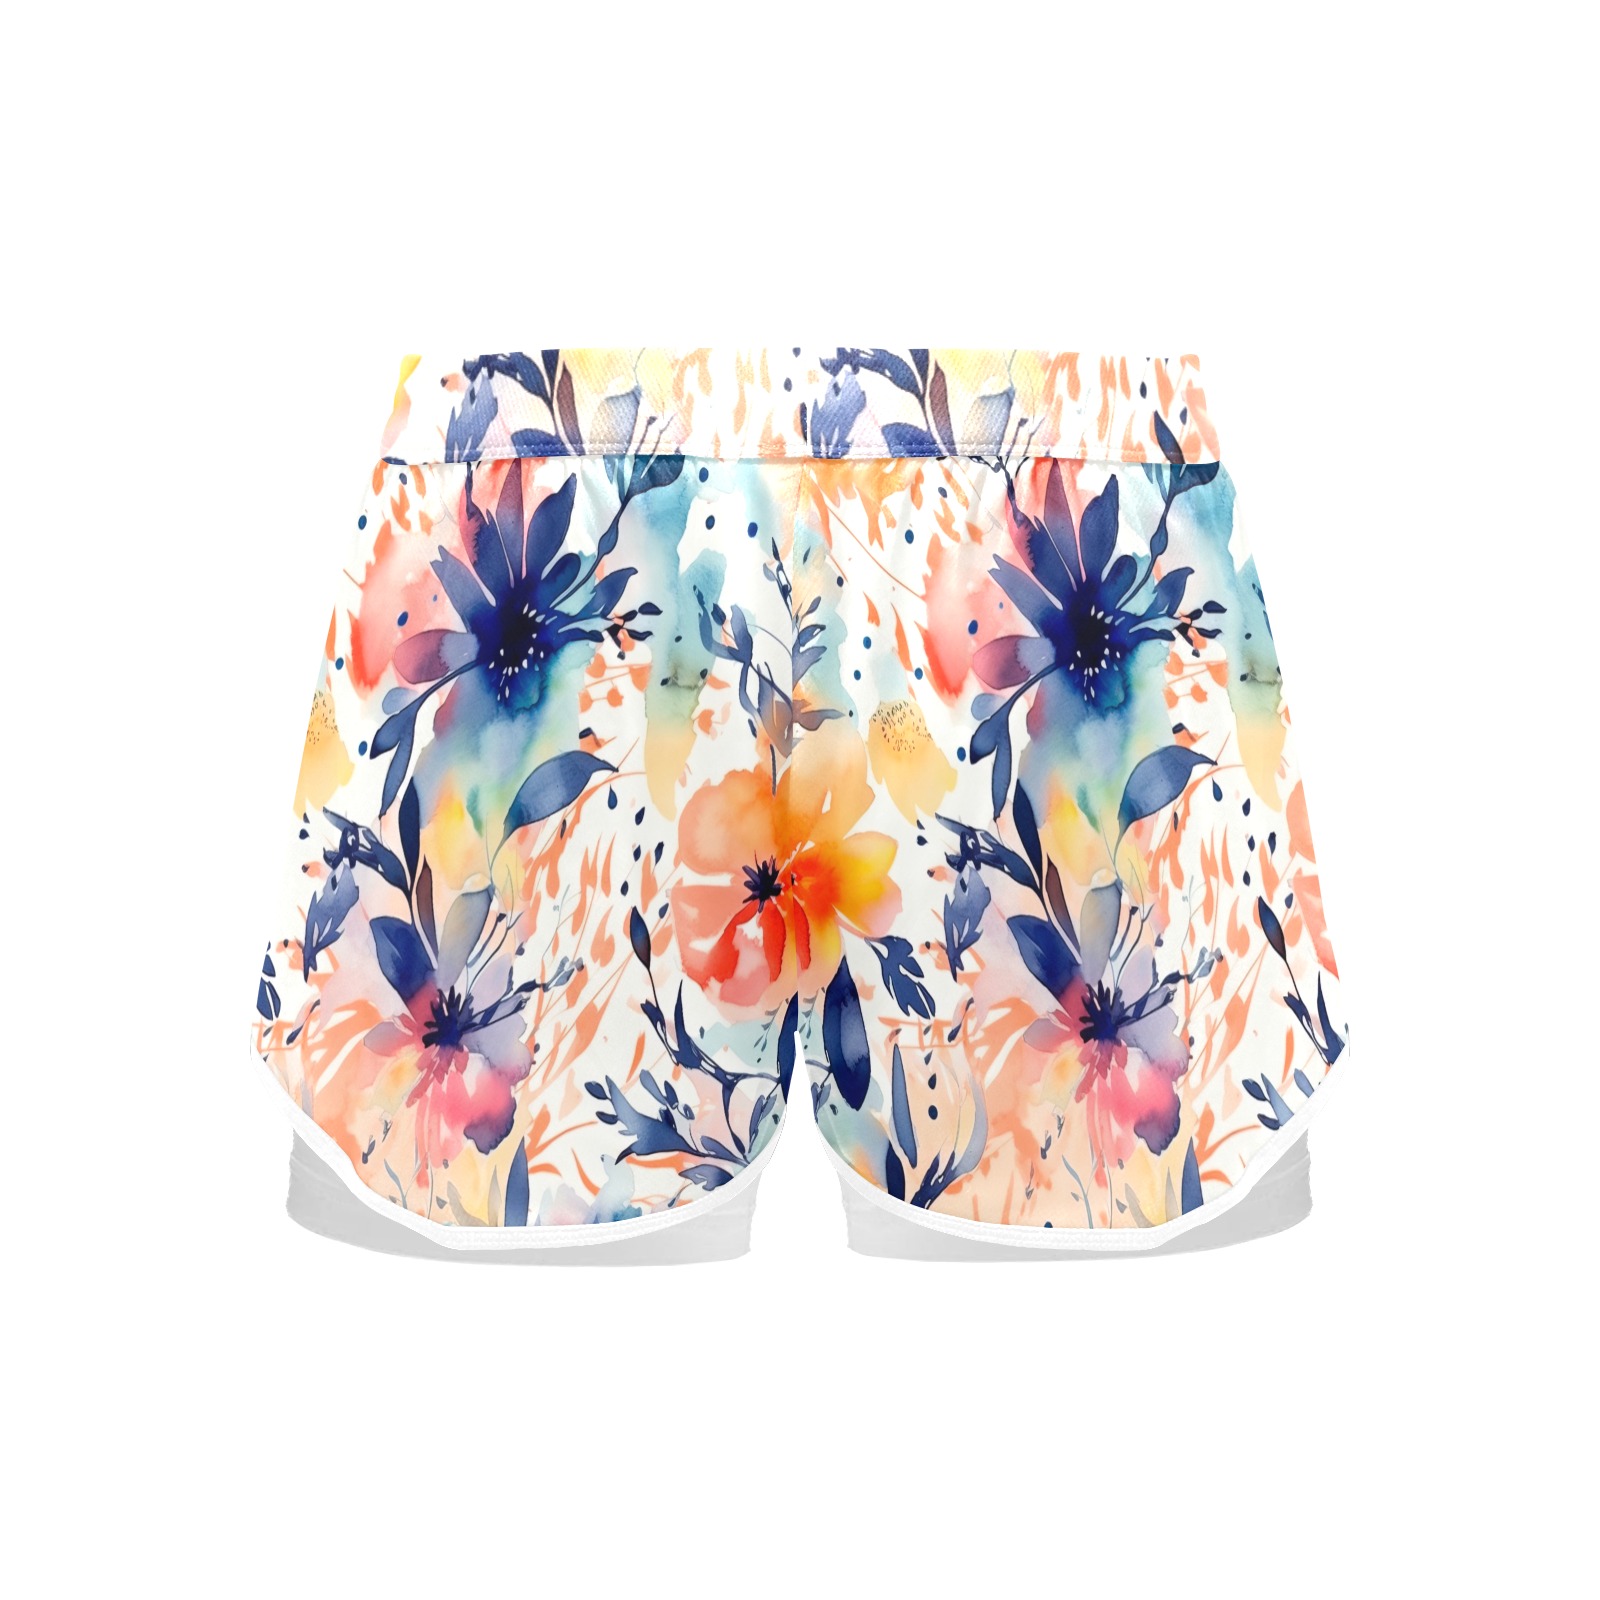 Watercolor-floral-pattern-blooming_12 Women's Sports Shorts with Compression Liner (Model L63)